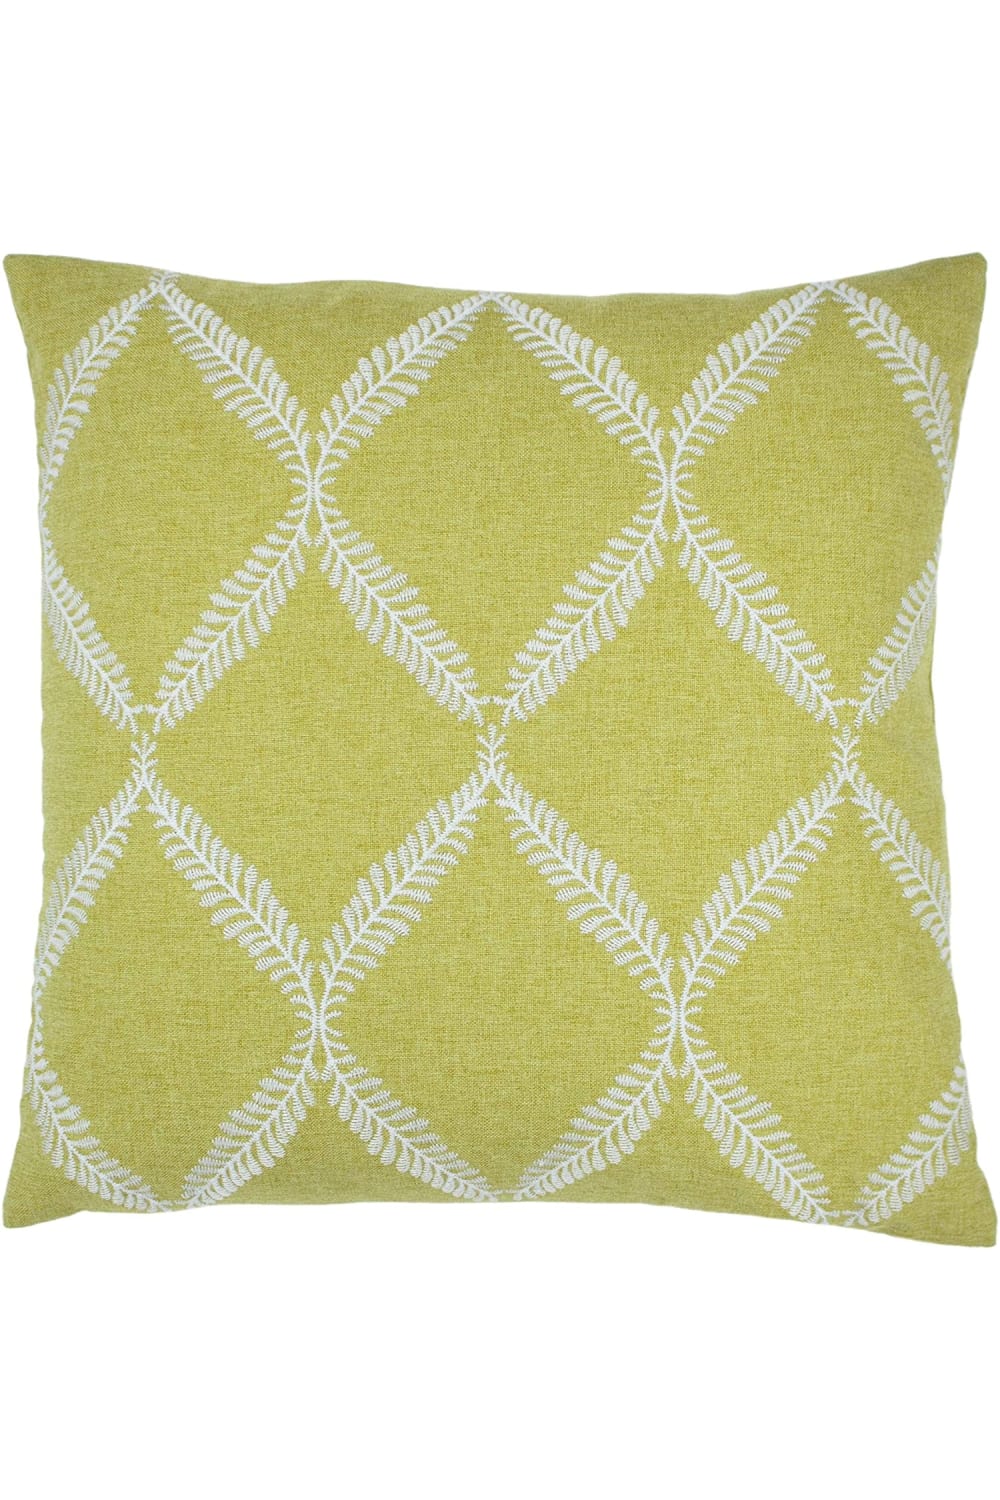 Paoletti Olivia Cushion Cover (Citrus Yellow) (One Size)